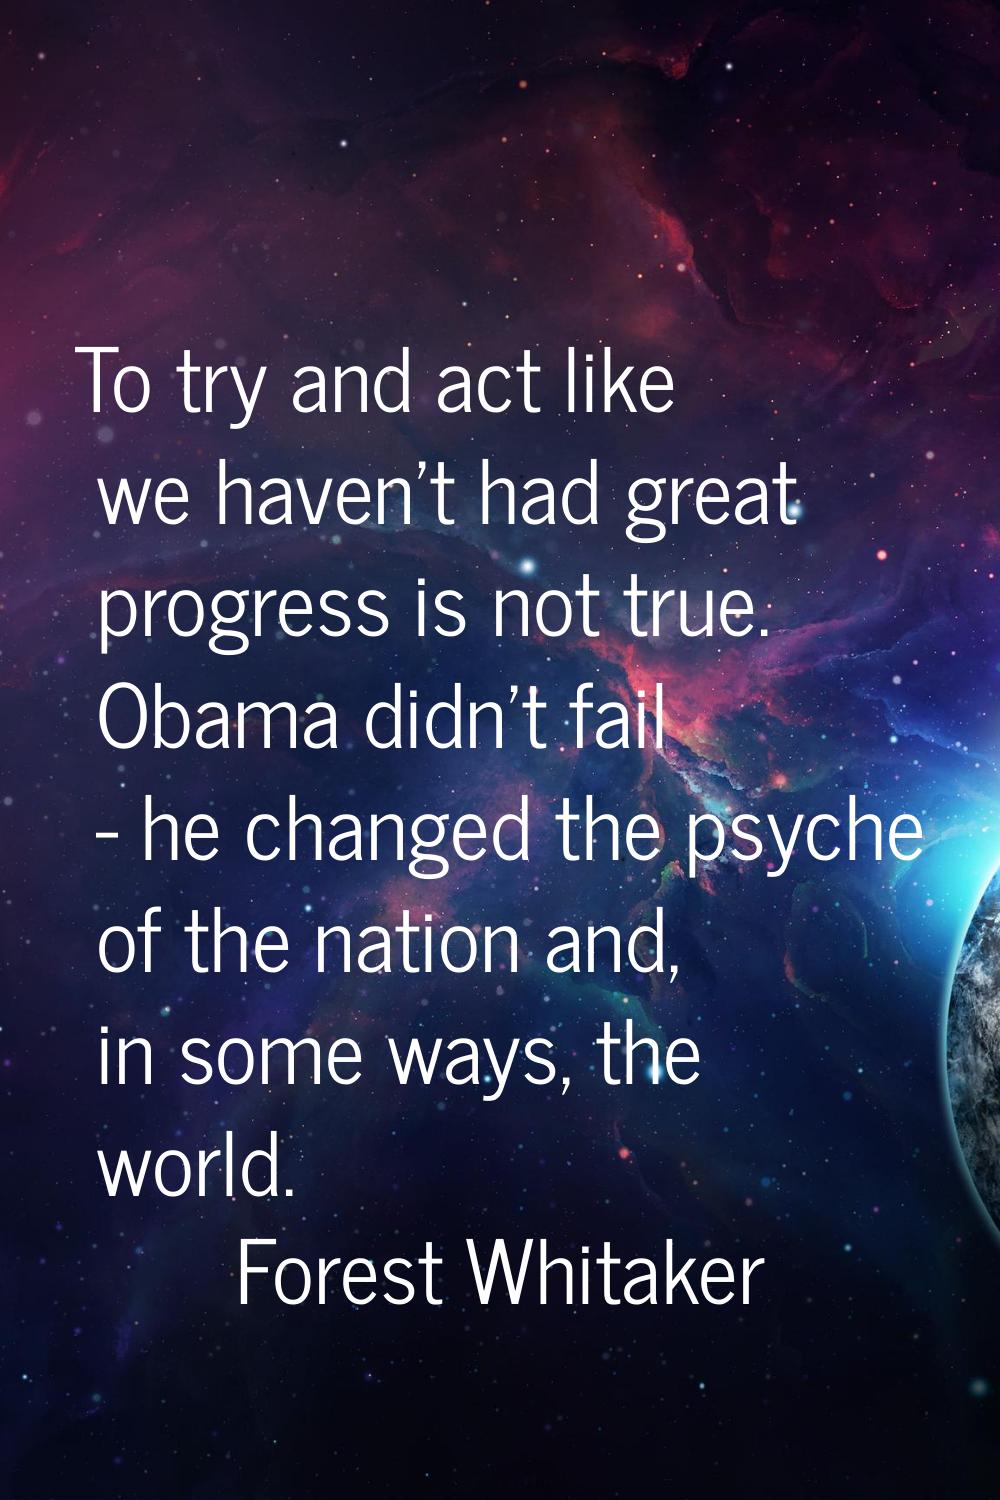 To try and act like we haven't had great progress is not true. Obama didn't fail - he changed the p